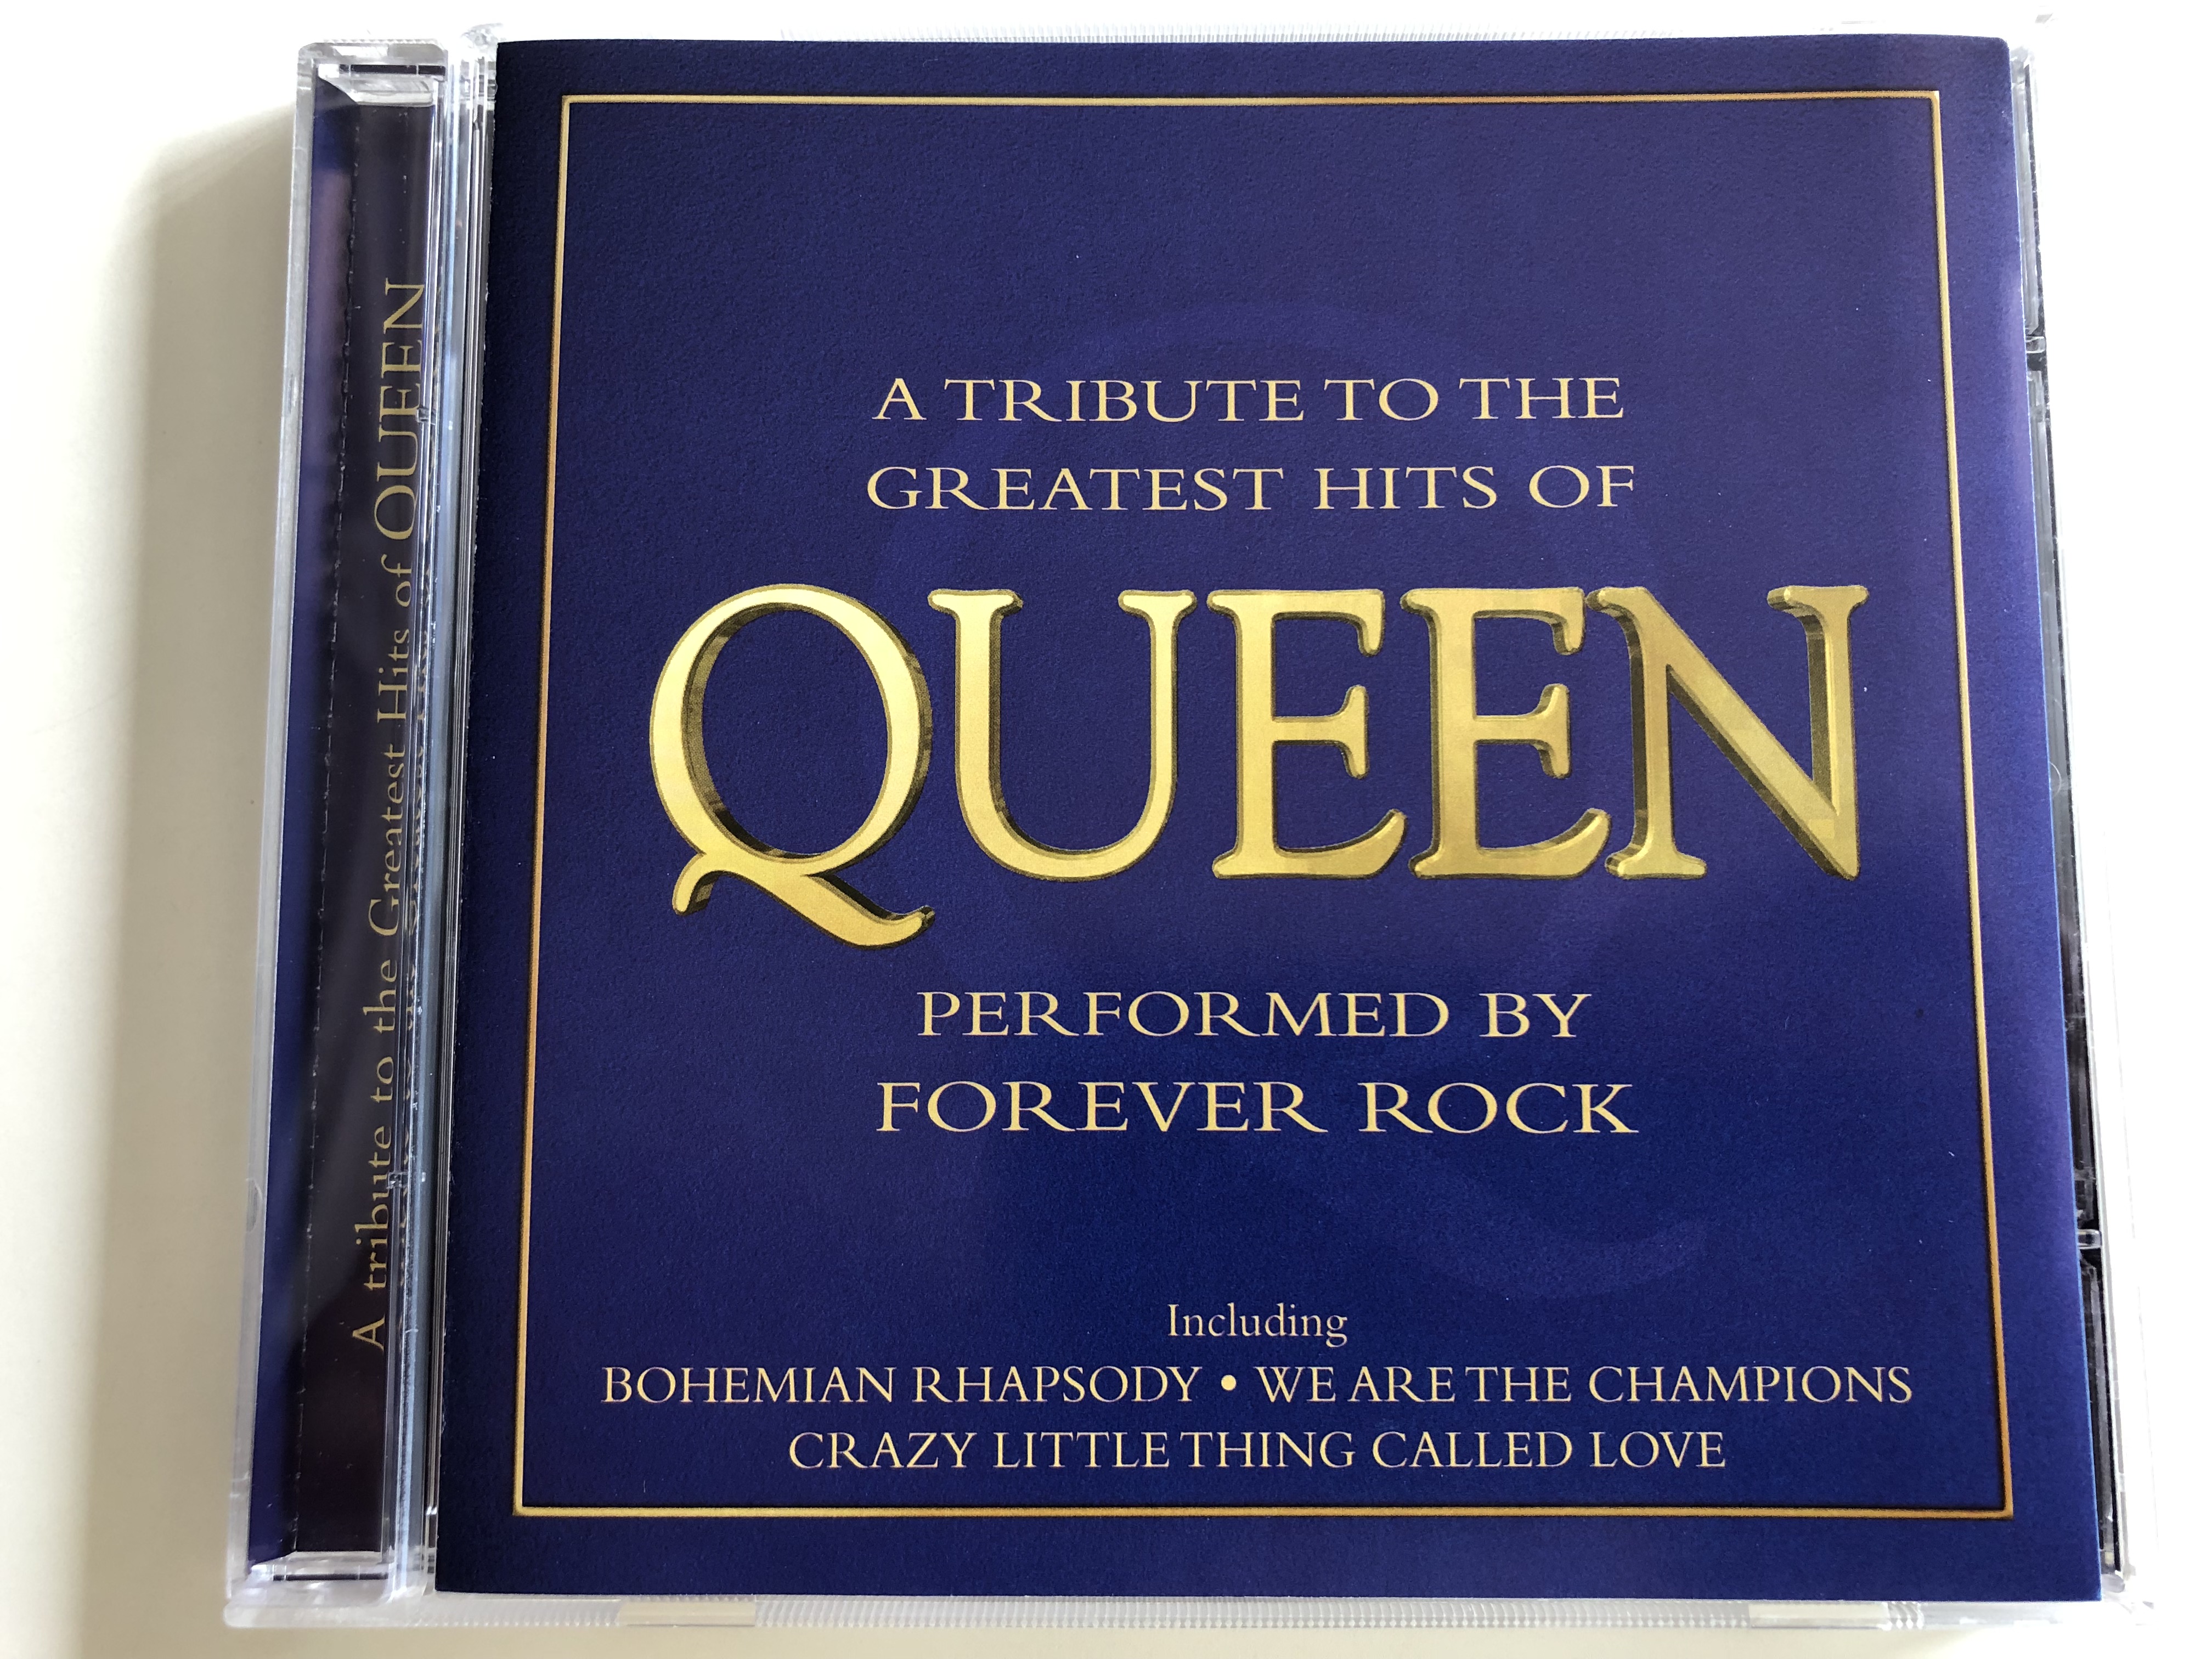 a-tribute-to-the-greatest-hits-of-queen-performed-by-forever-rock-including-bohemian-rhapsody-we-are-the-champions-crazy-little-thing-called-love-biem-audio-cd-2004-sp-111-2-1-.jpg